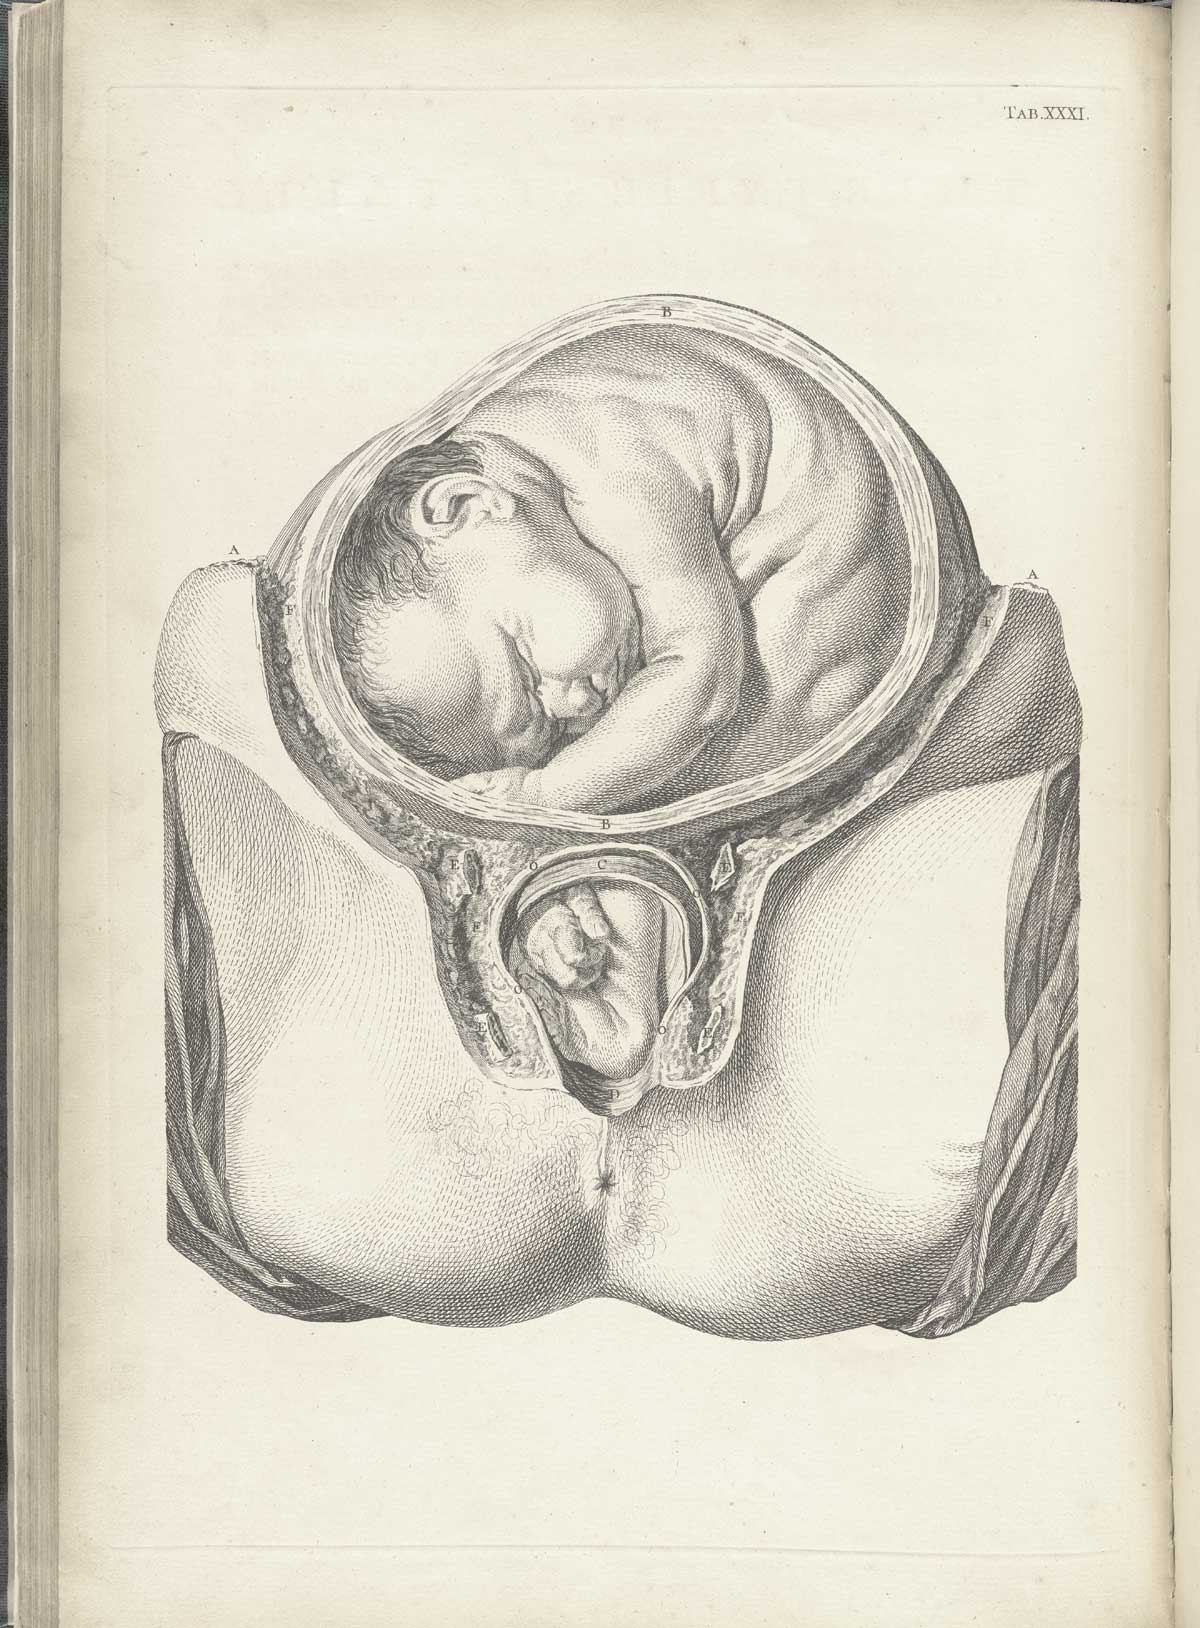 Table 31 of William Smellie's A sett of anatomical tables, with explanations, and an abridgment, of the practice of midwifery, featuring a baby in the uterus with its right hand and left leg crossed in the birthing canal.